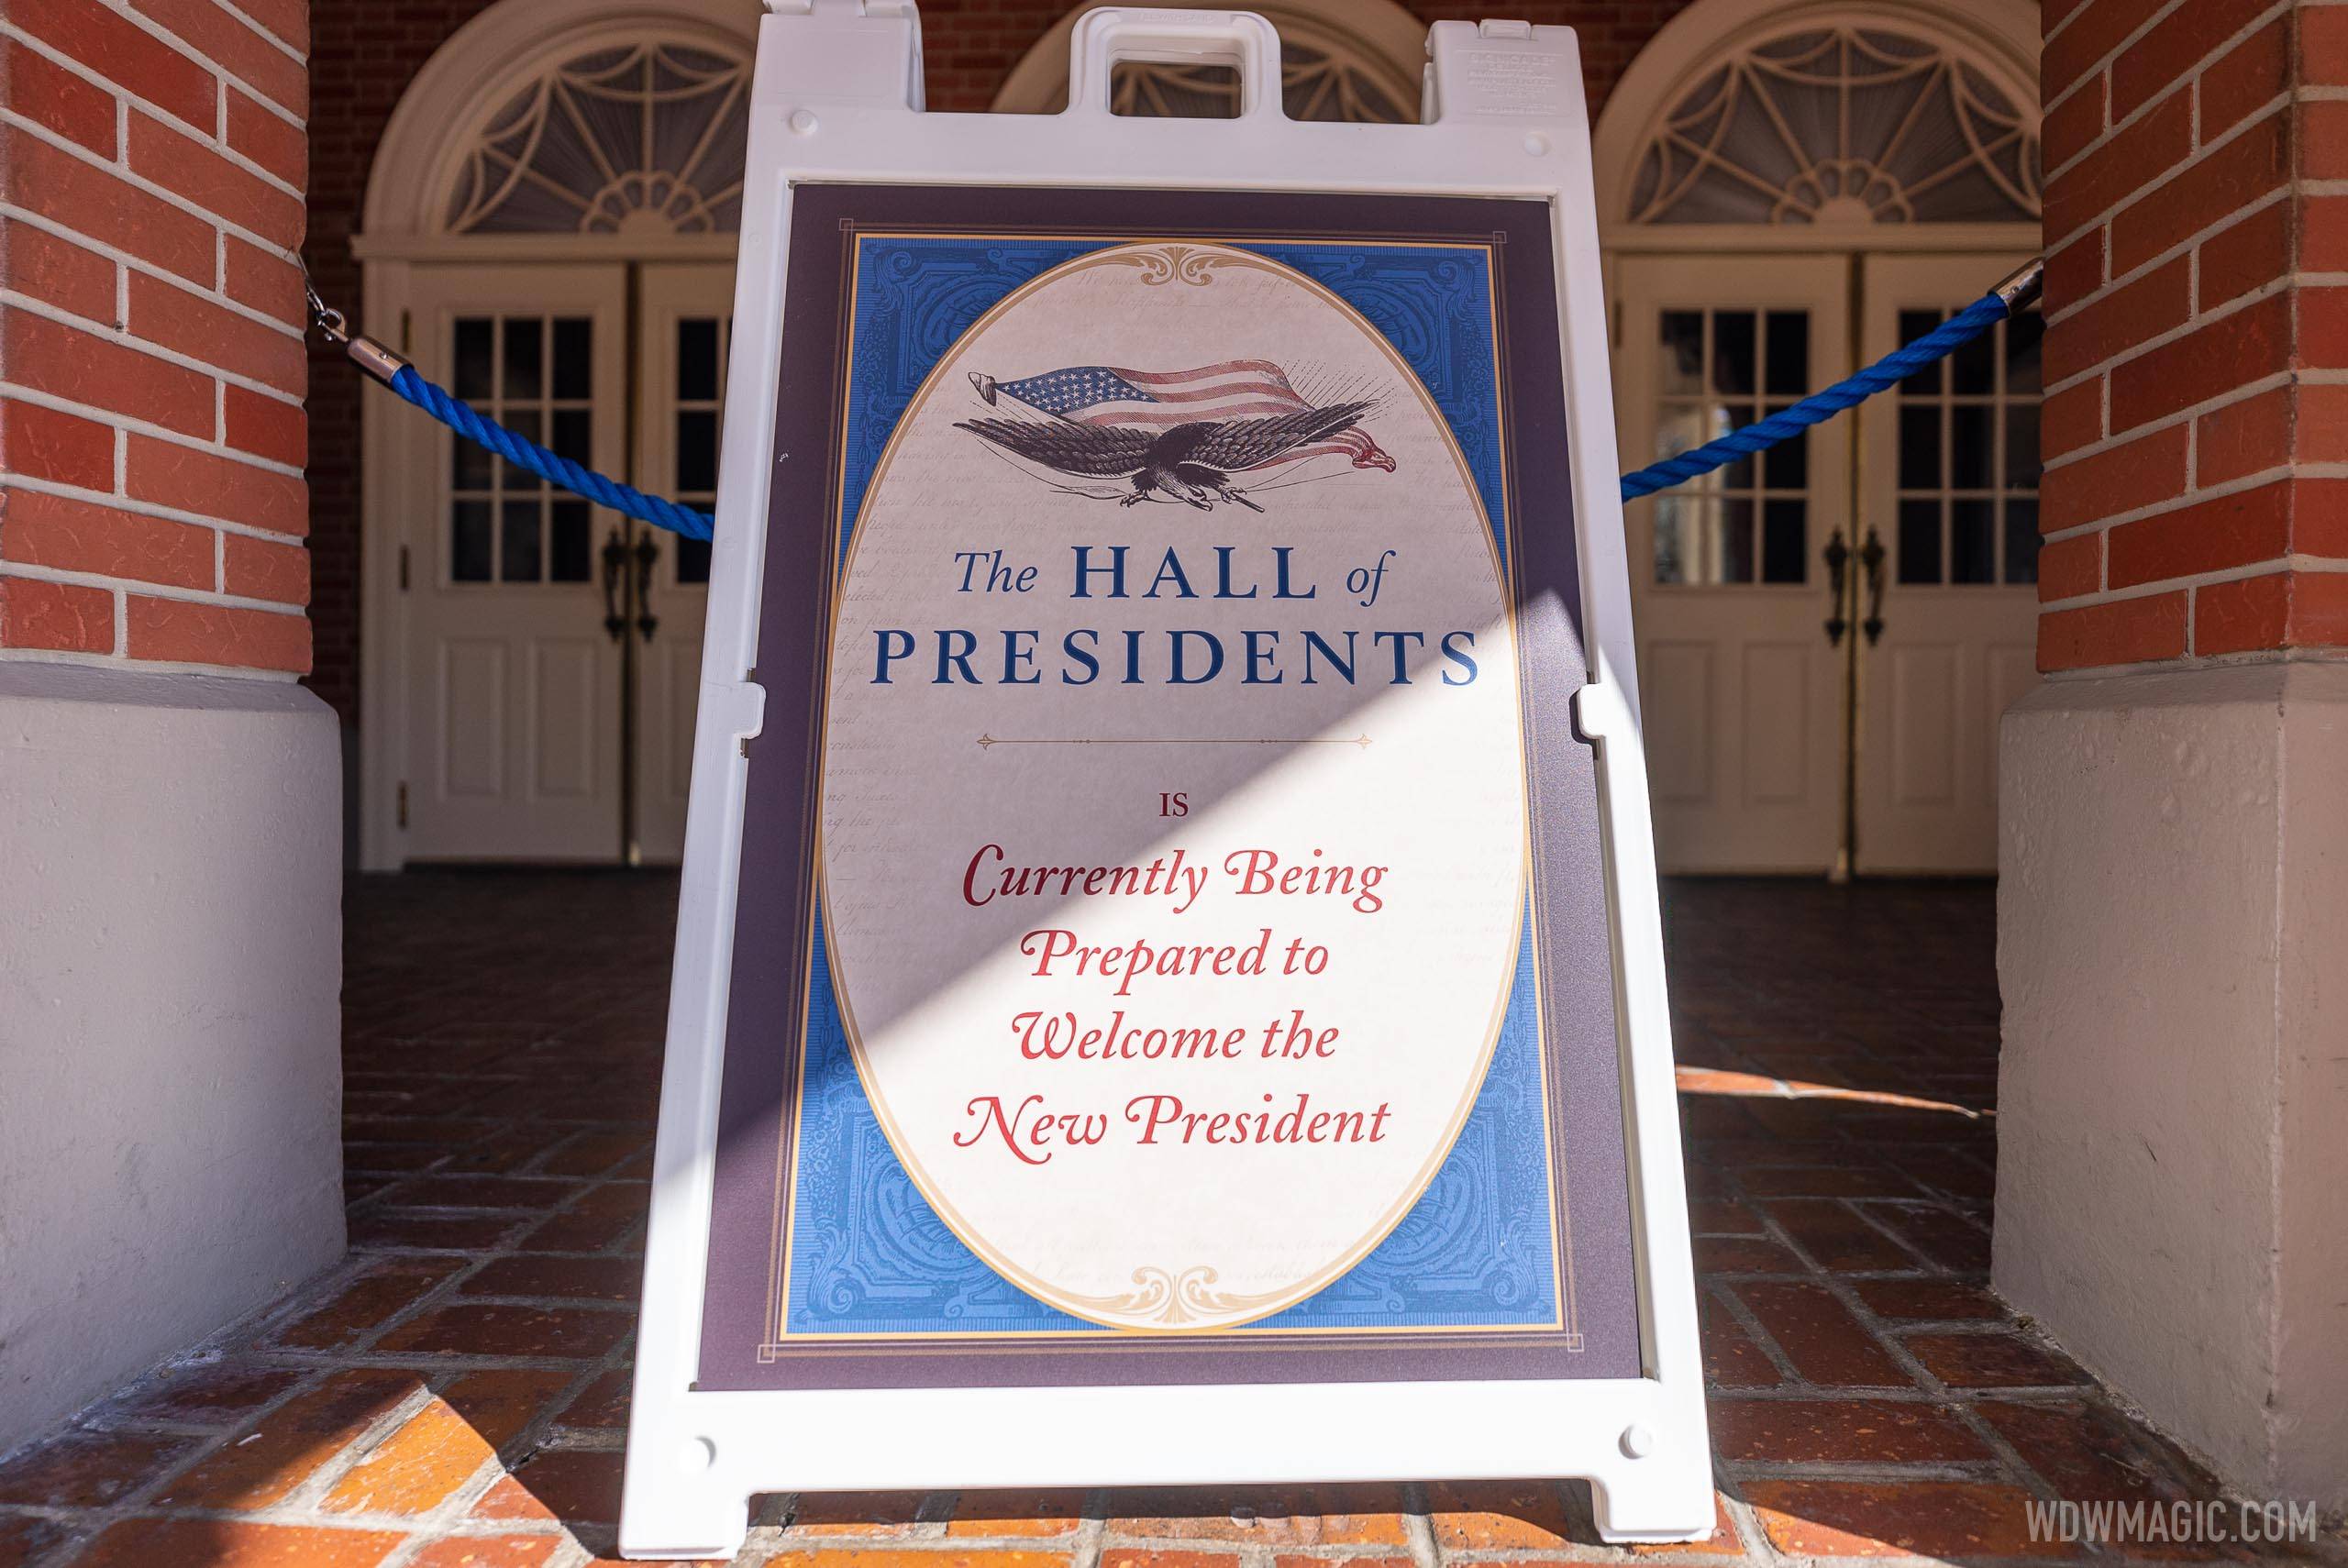 The Hall of Presidents closed for refurbishment - January 2021